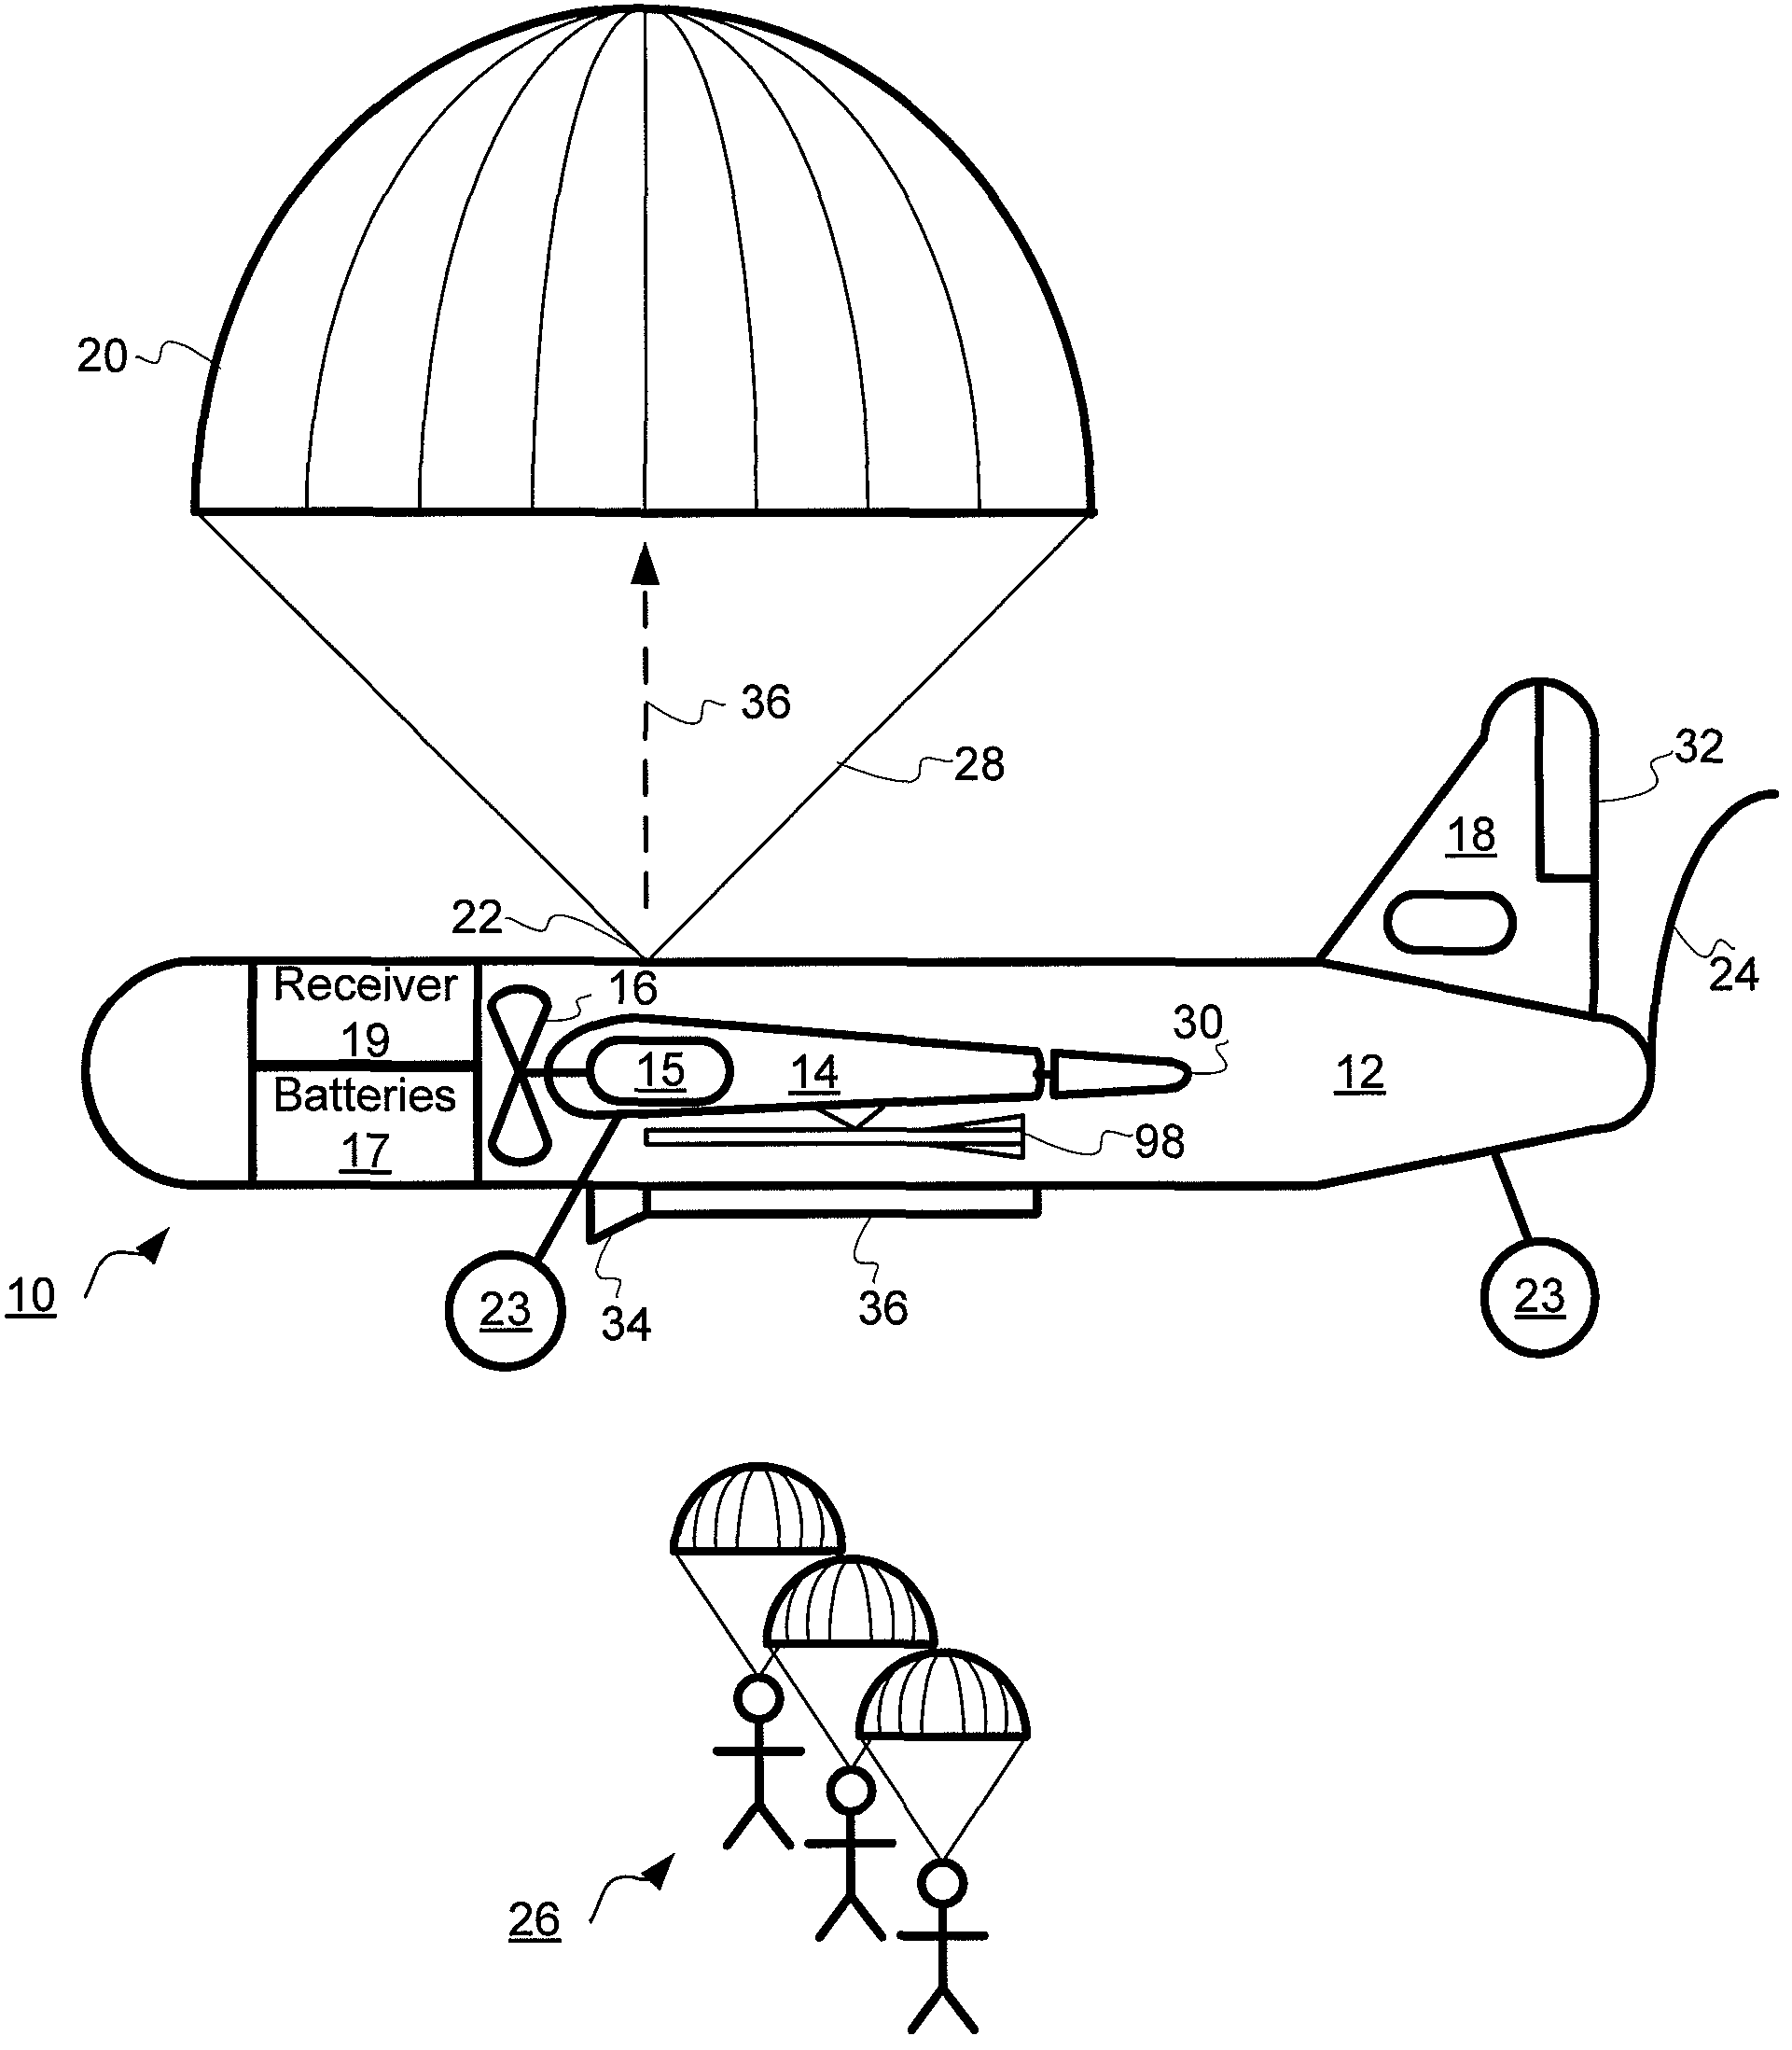 Remote control aircraft with parachutes